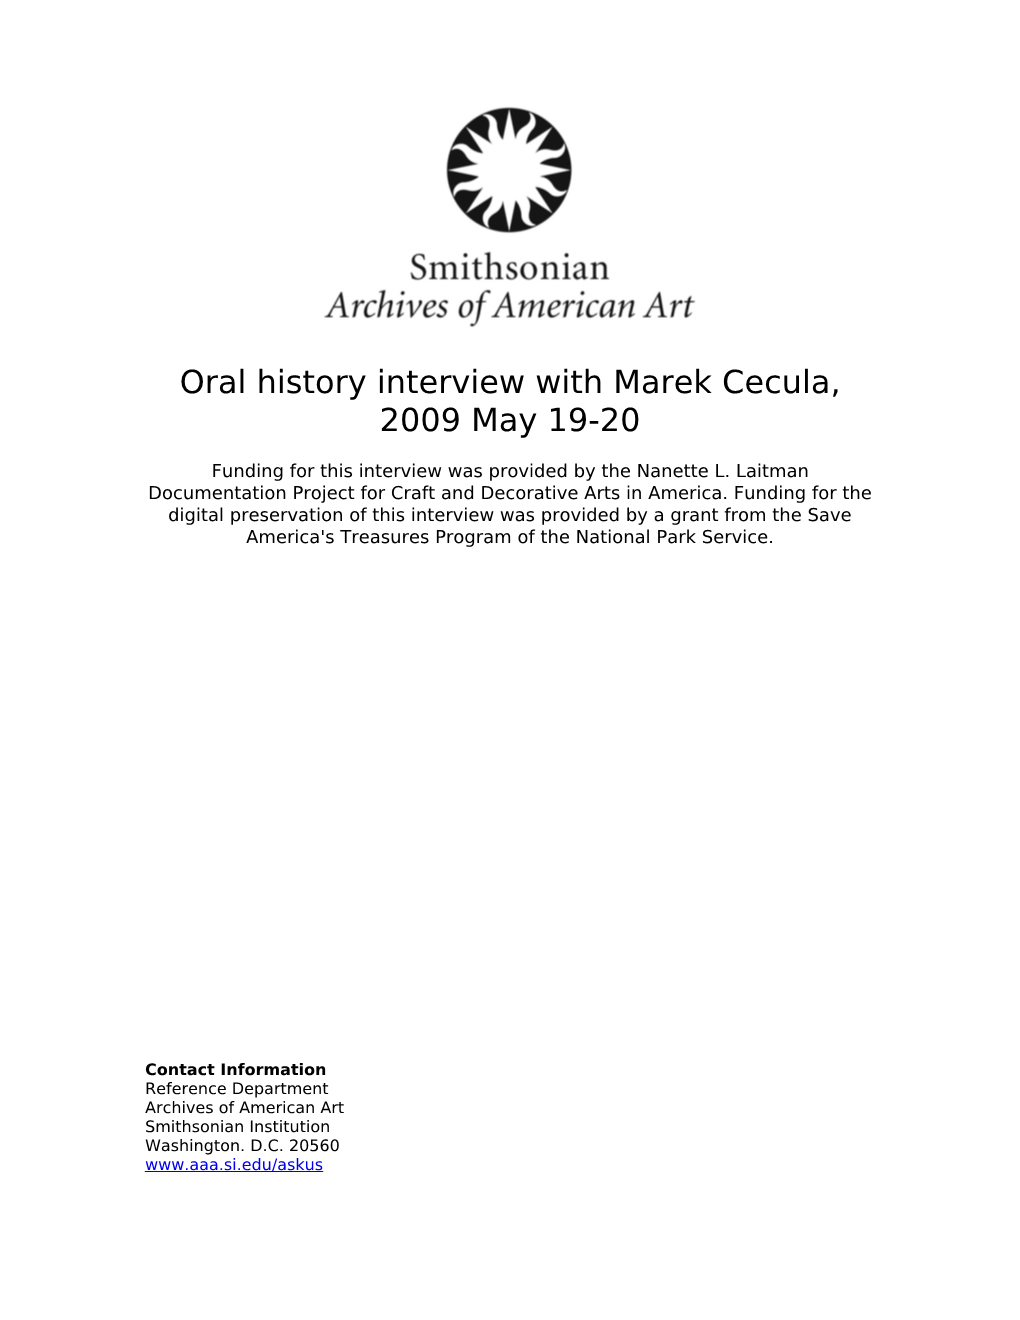 Oral History Interview with Marek Cecula, 2009 May 19-20